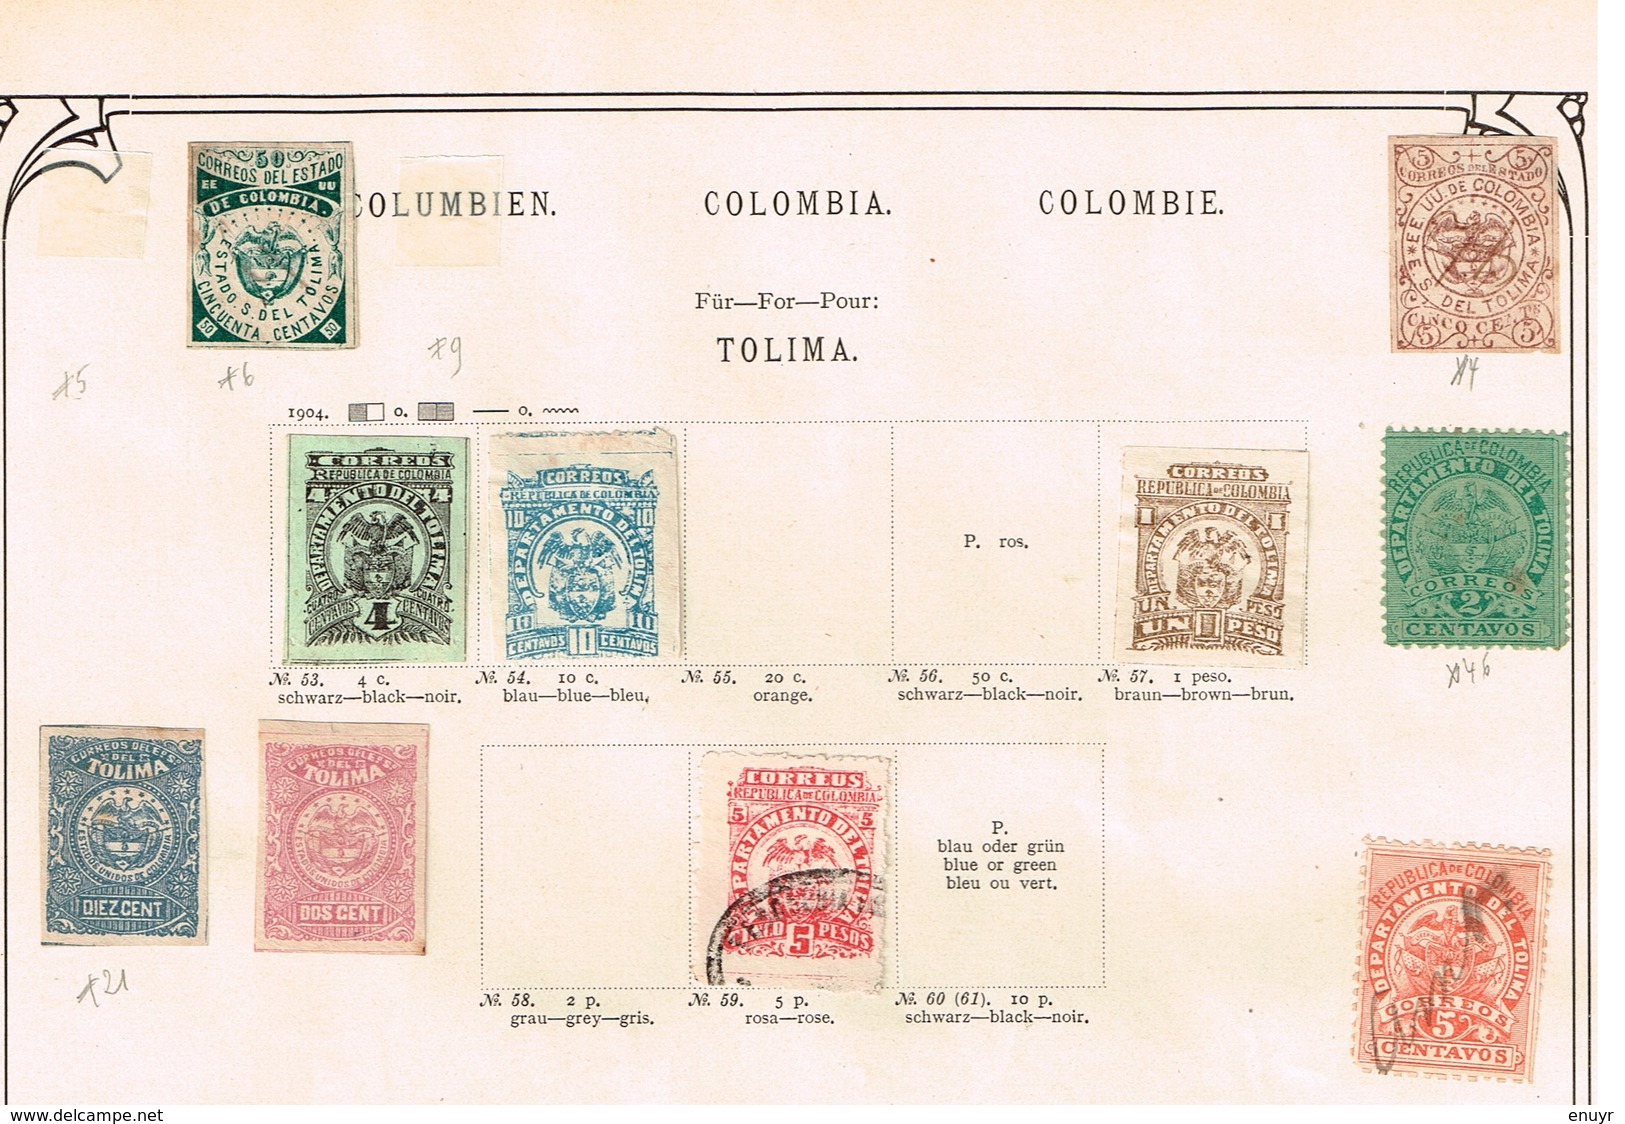 Colombie + Provinces. Ancienne collection. Old collection. Altsammlung. Oude verzameling